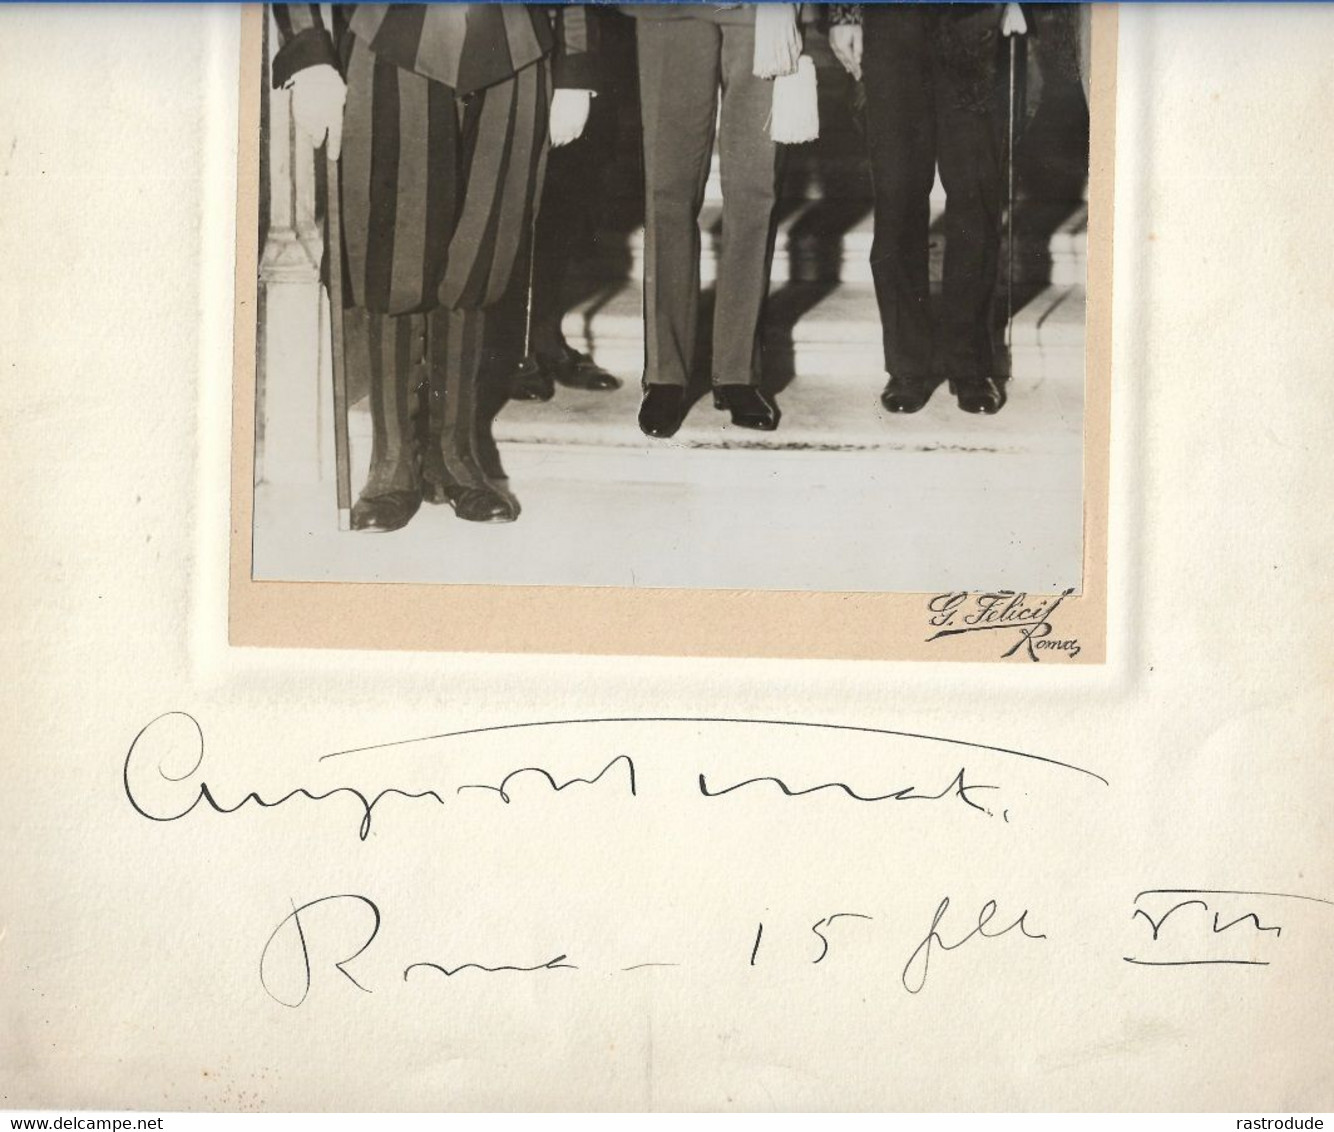 1930s ORIGINAL PHOTOGRAPH Of AUGUSTO TURATI In The VATICAN W. SWISS GUARD By GIUSEPPE FELICI - SIGNED - Gehandtekende Foto's